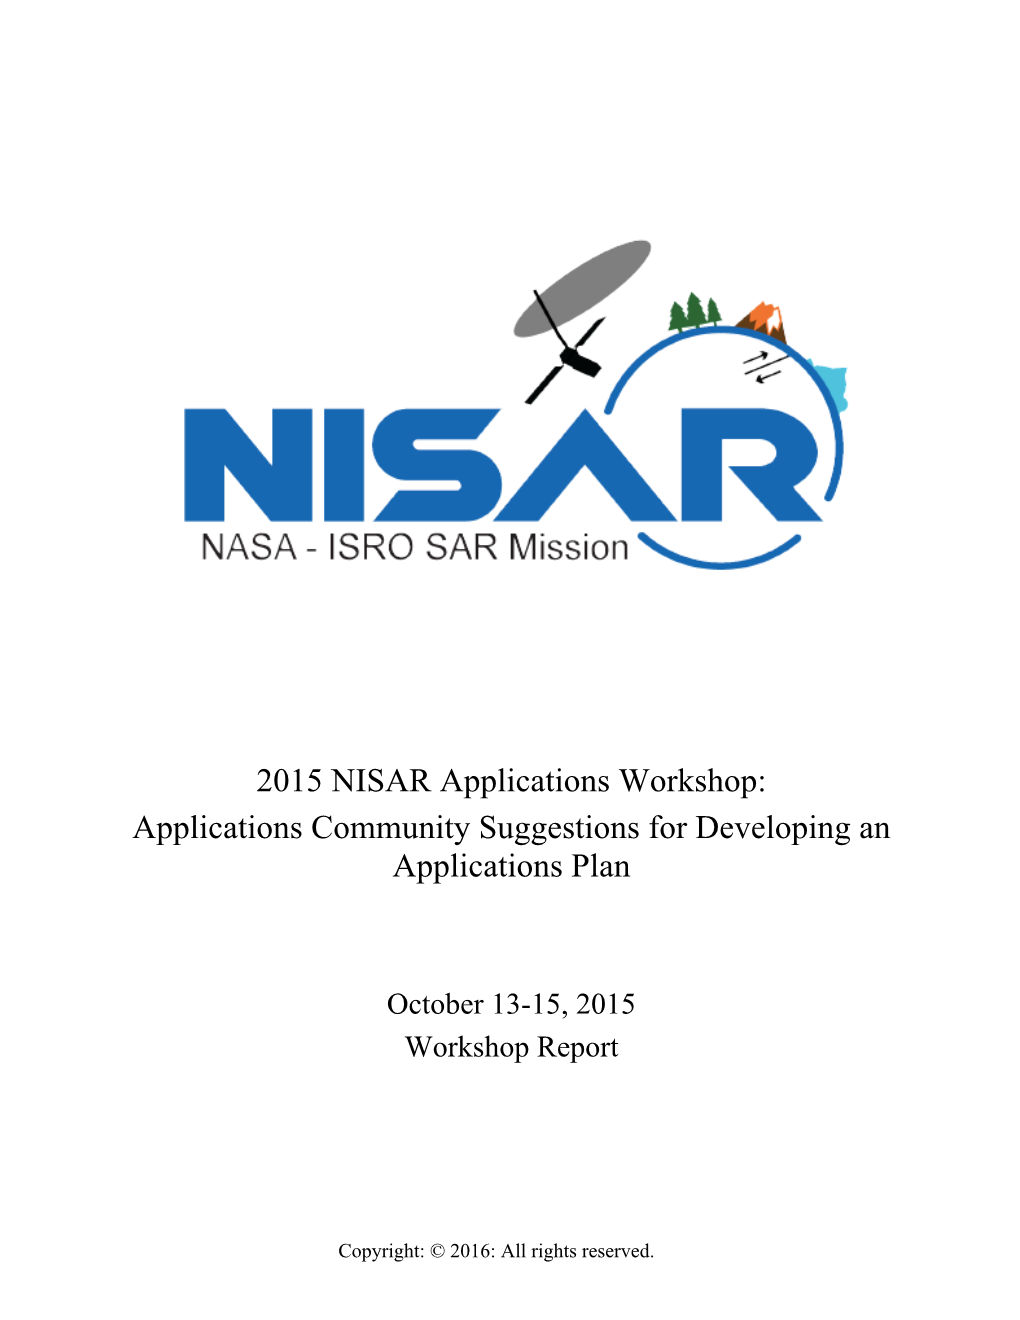 2015 NISAR Applications Workshop: Applications Community Suggestions for Developing an Applications Plan